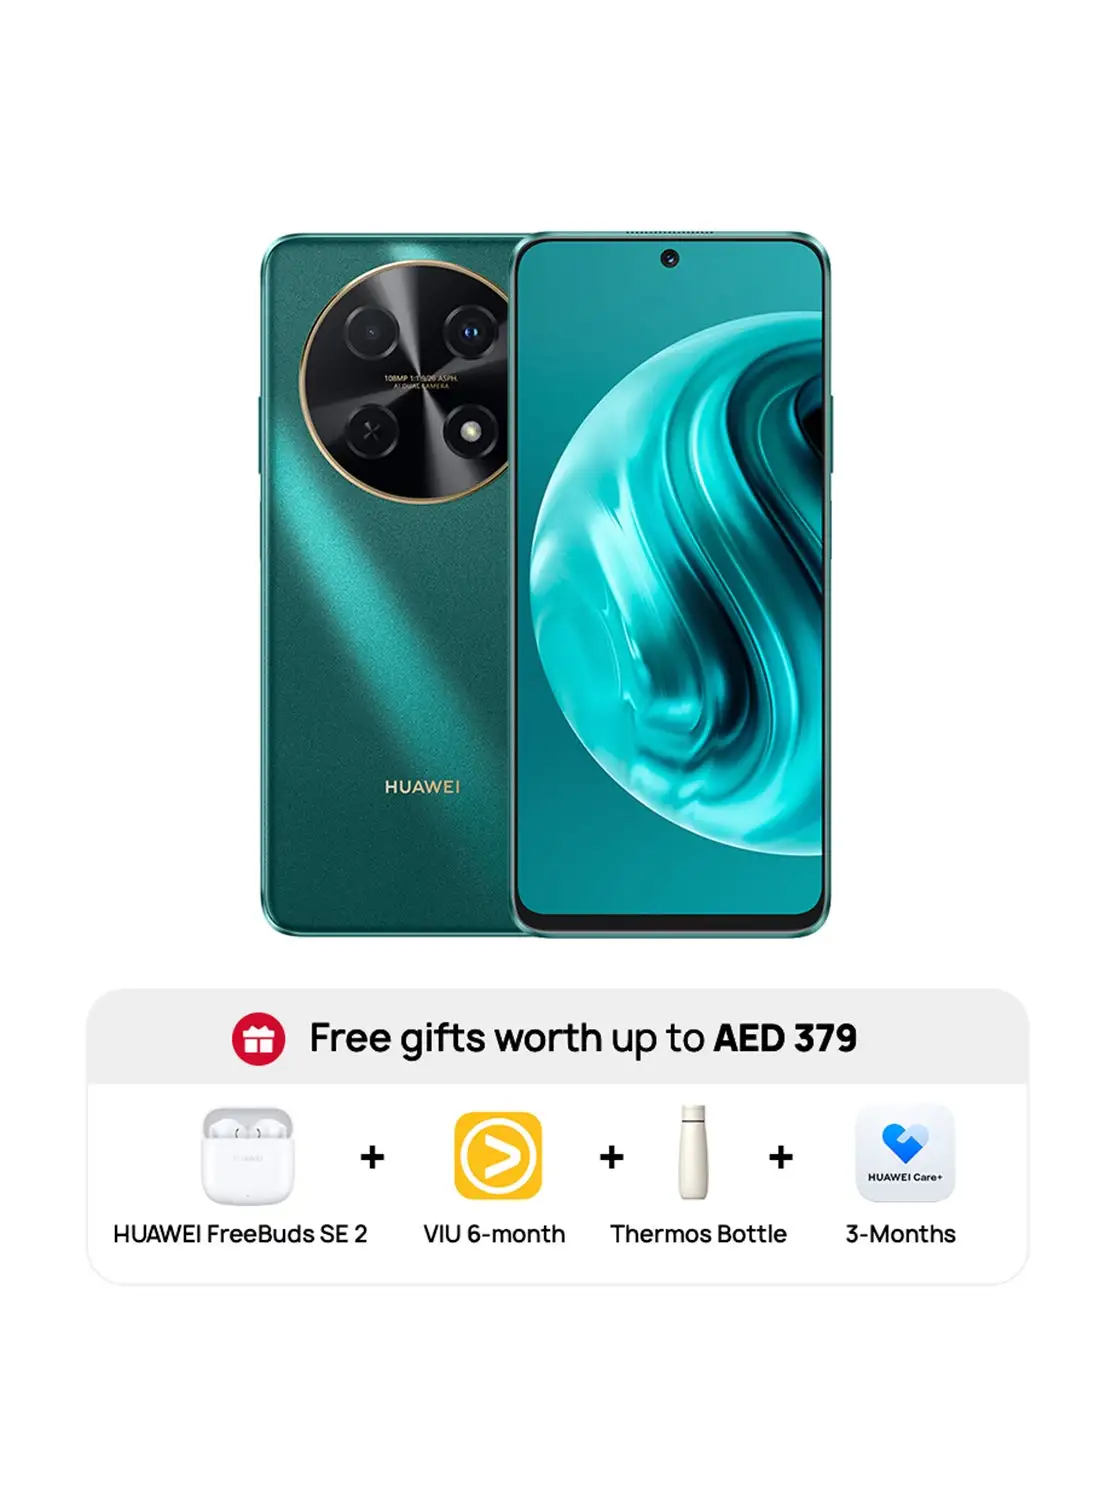 HUAWEI Nova 12i Dual SIM Green 8GB RAM 256GB 4G LTE With FBSE2 + 6 Months VIU + Thermos Bottle + 3 Months Huawei Care+ Worth AED 379 - Middle East Version